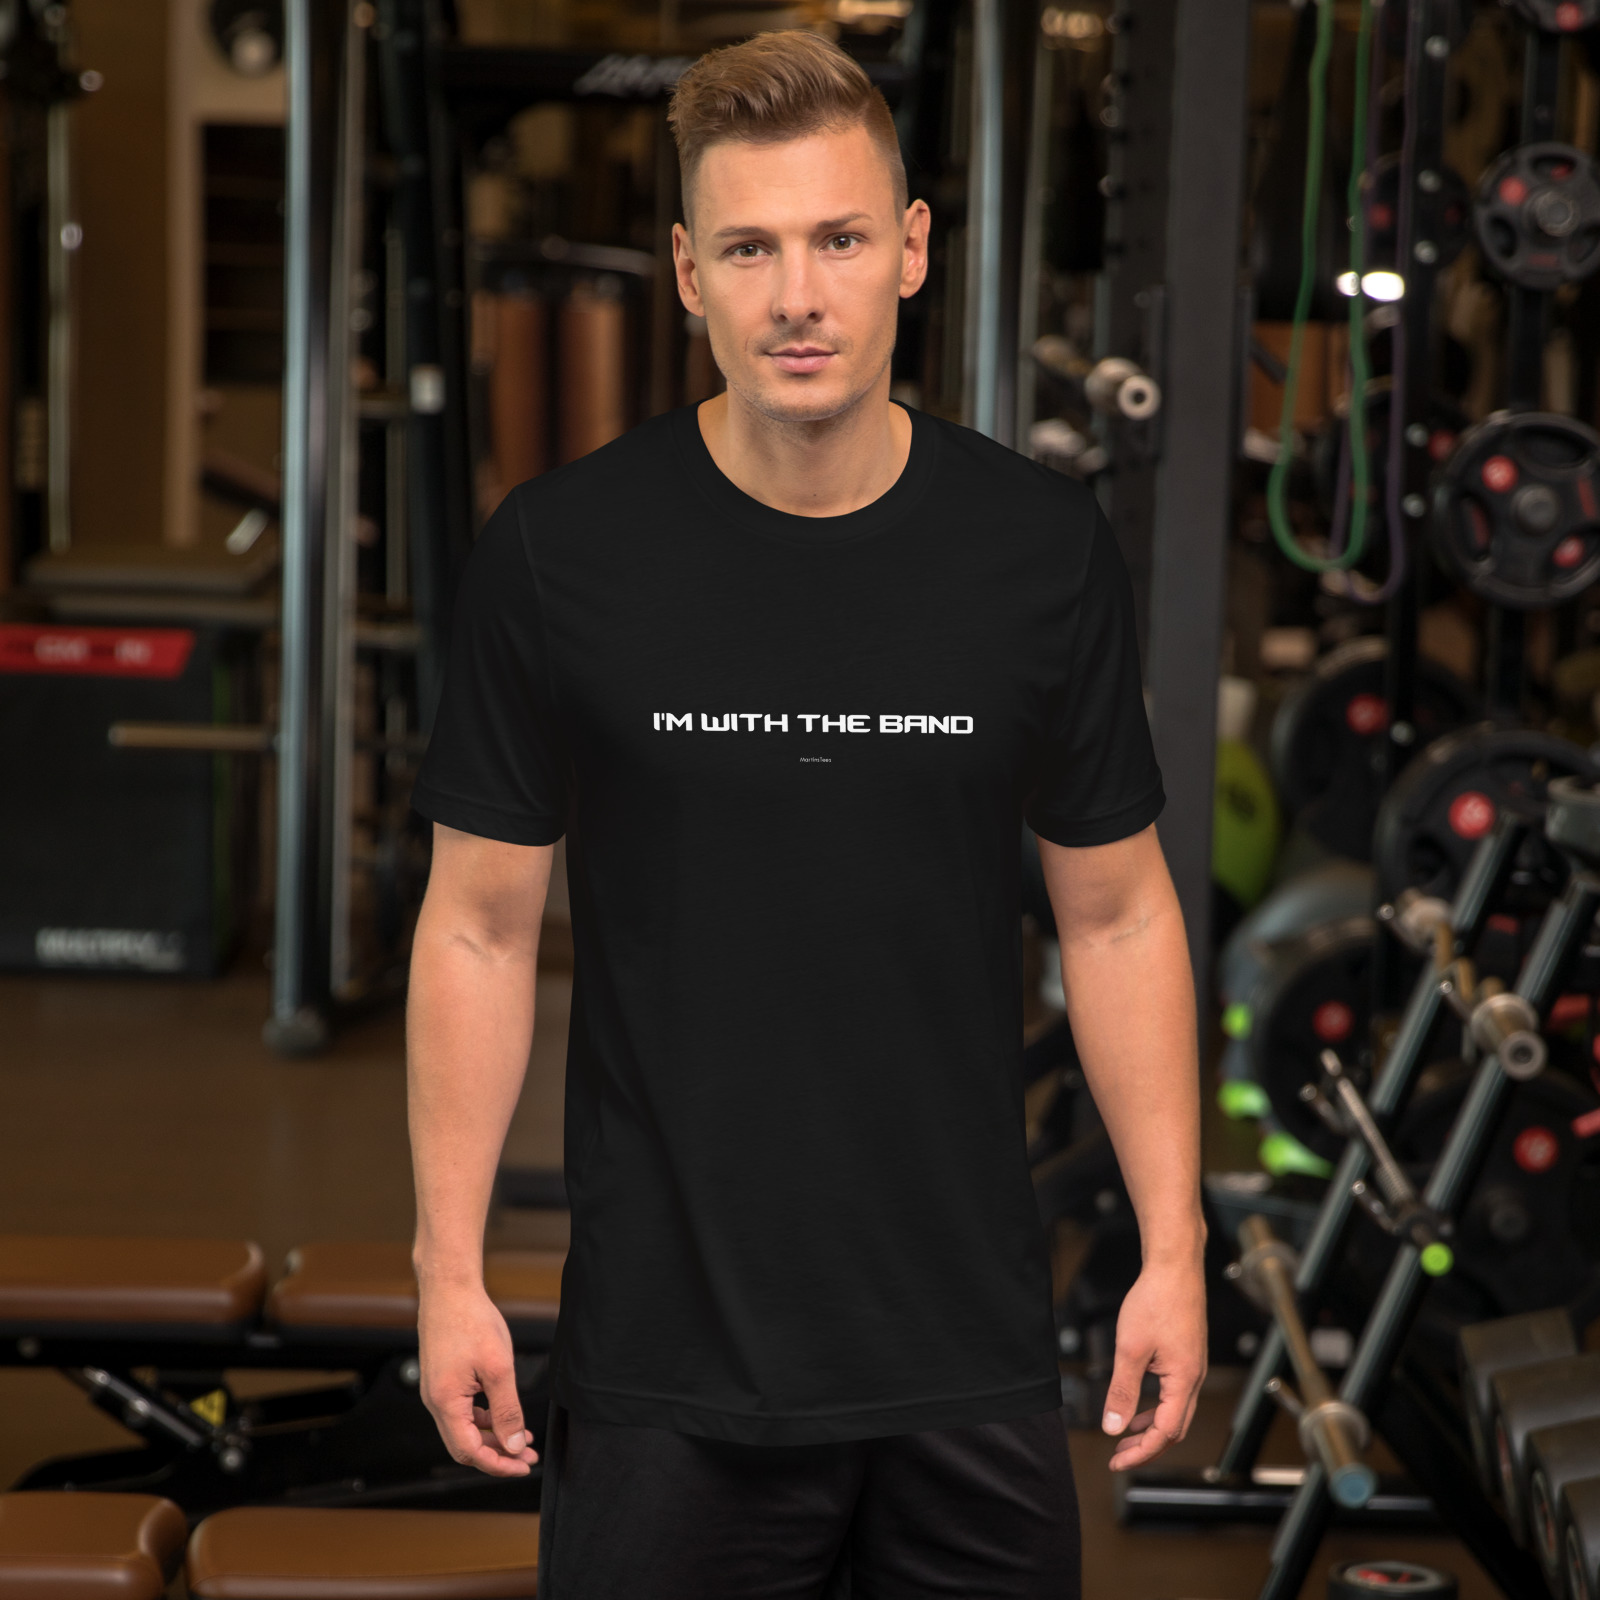 T-shirt: I'M WITH THE BAND